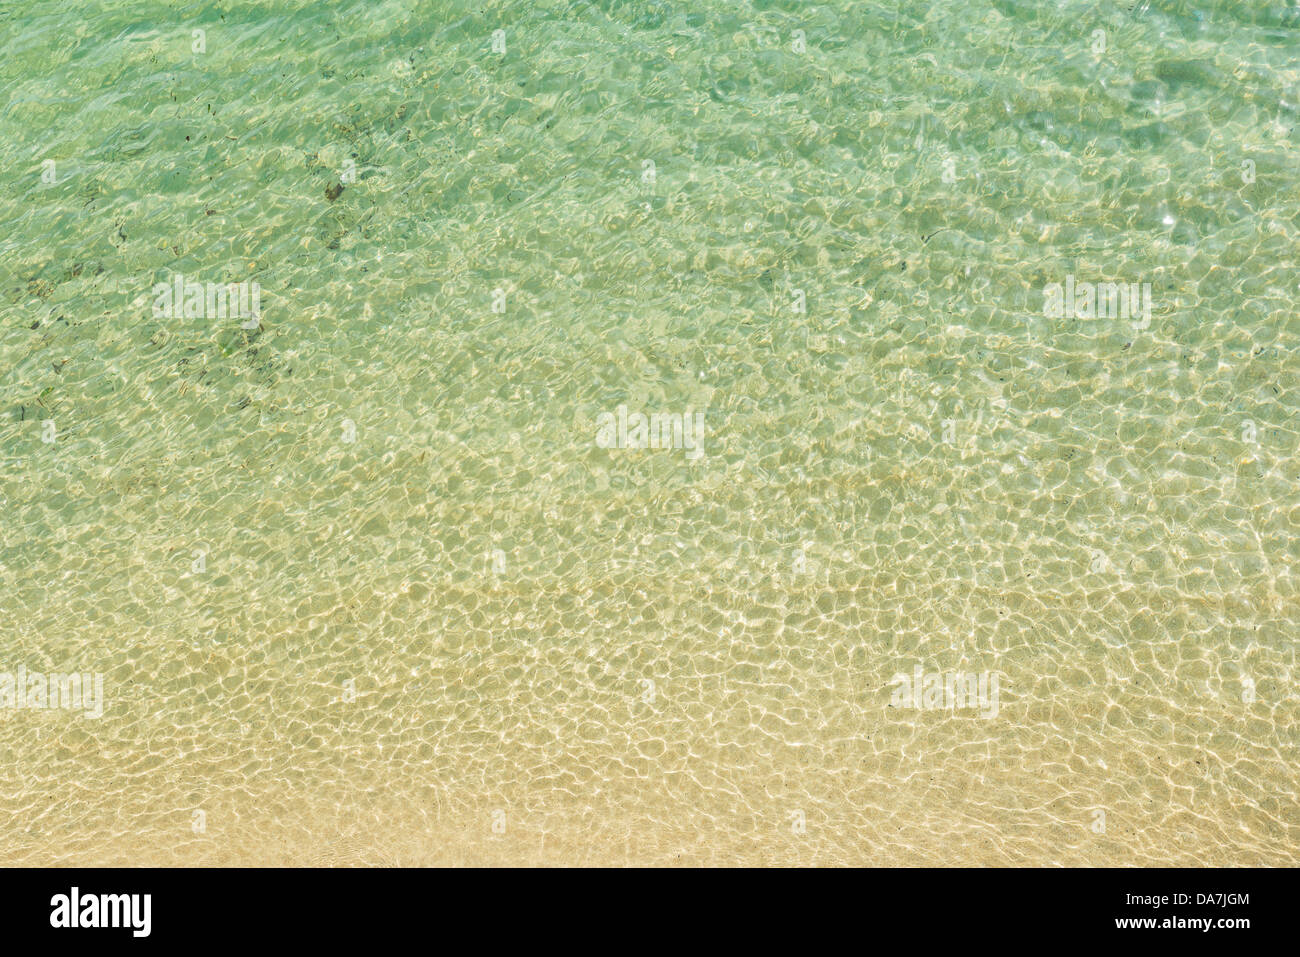 Shallow clear blue green rippling waters at St. Ives, Cornwall, Southwest England. Stock Photo